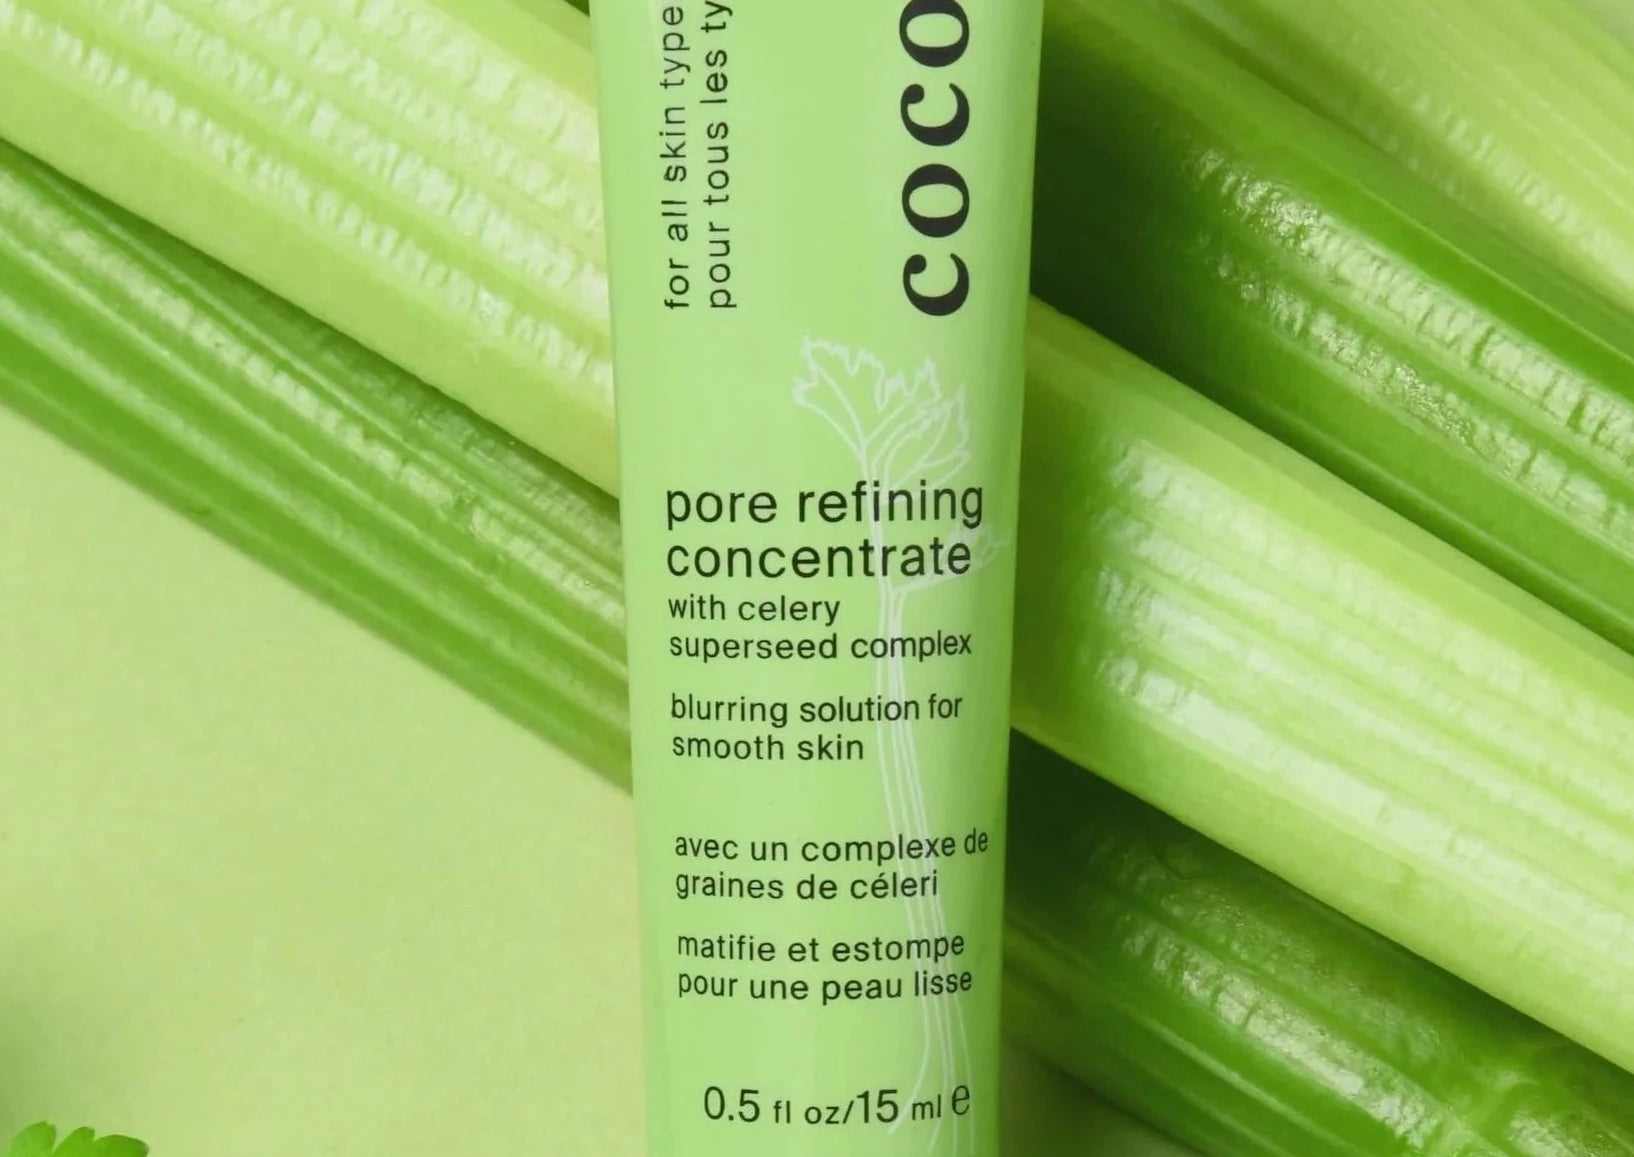 cocokind-pore-refning-concentrate